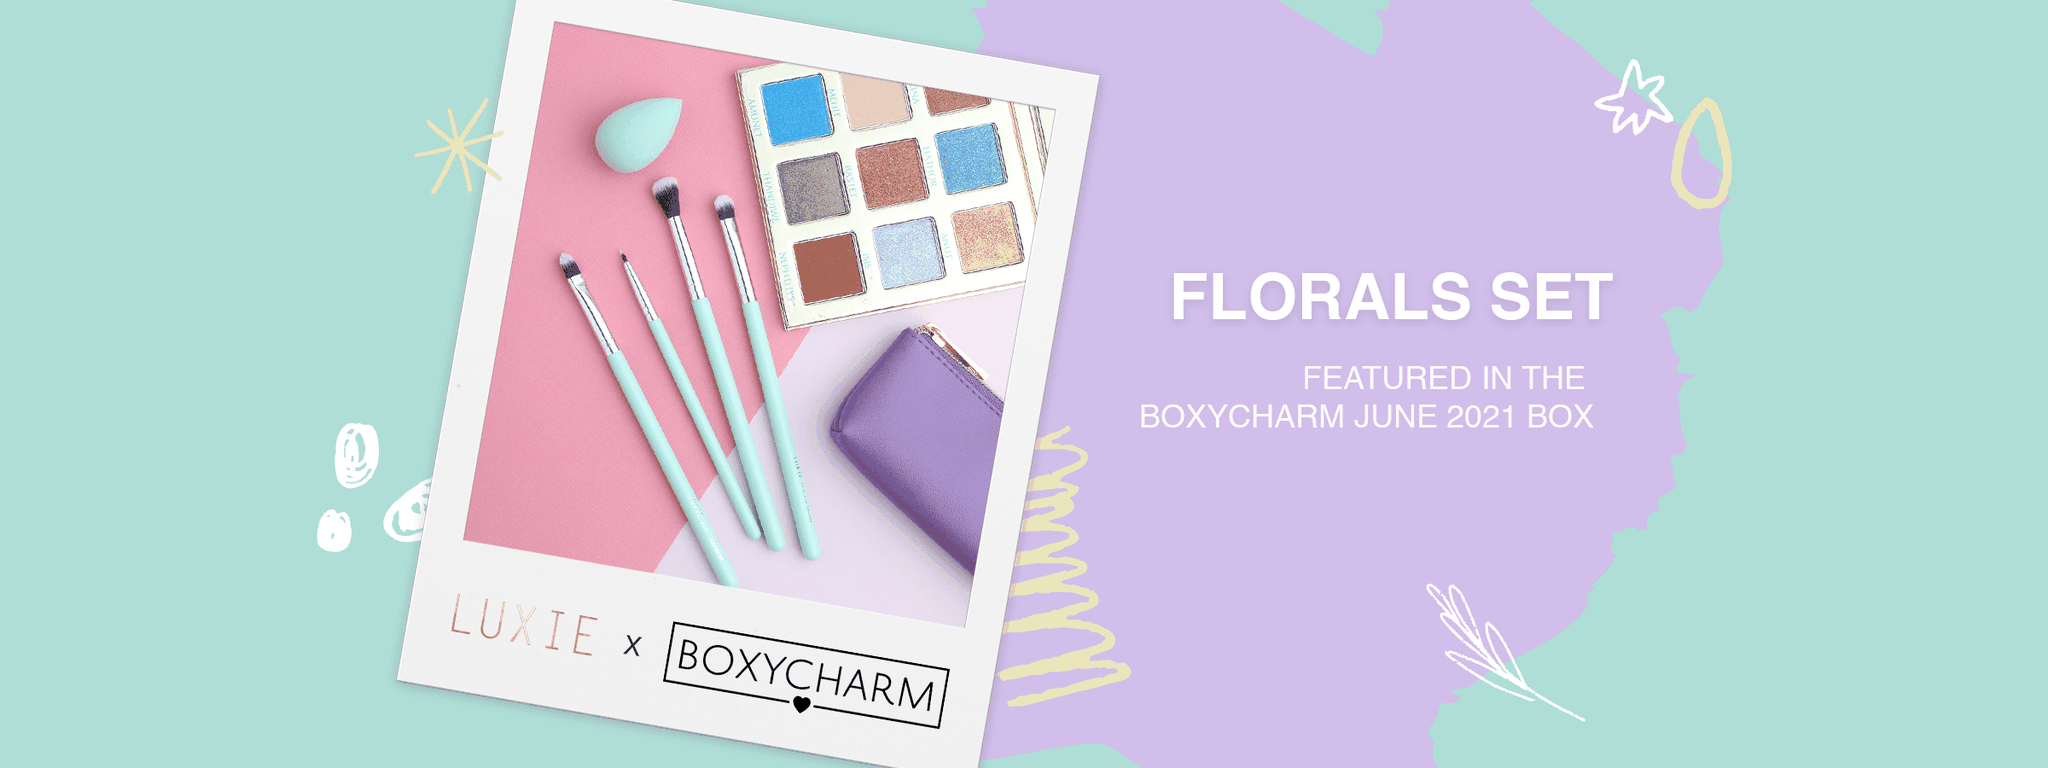 Luxie's Floral Set featured in the Boxycharm June 2021 box.